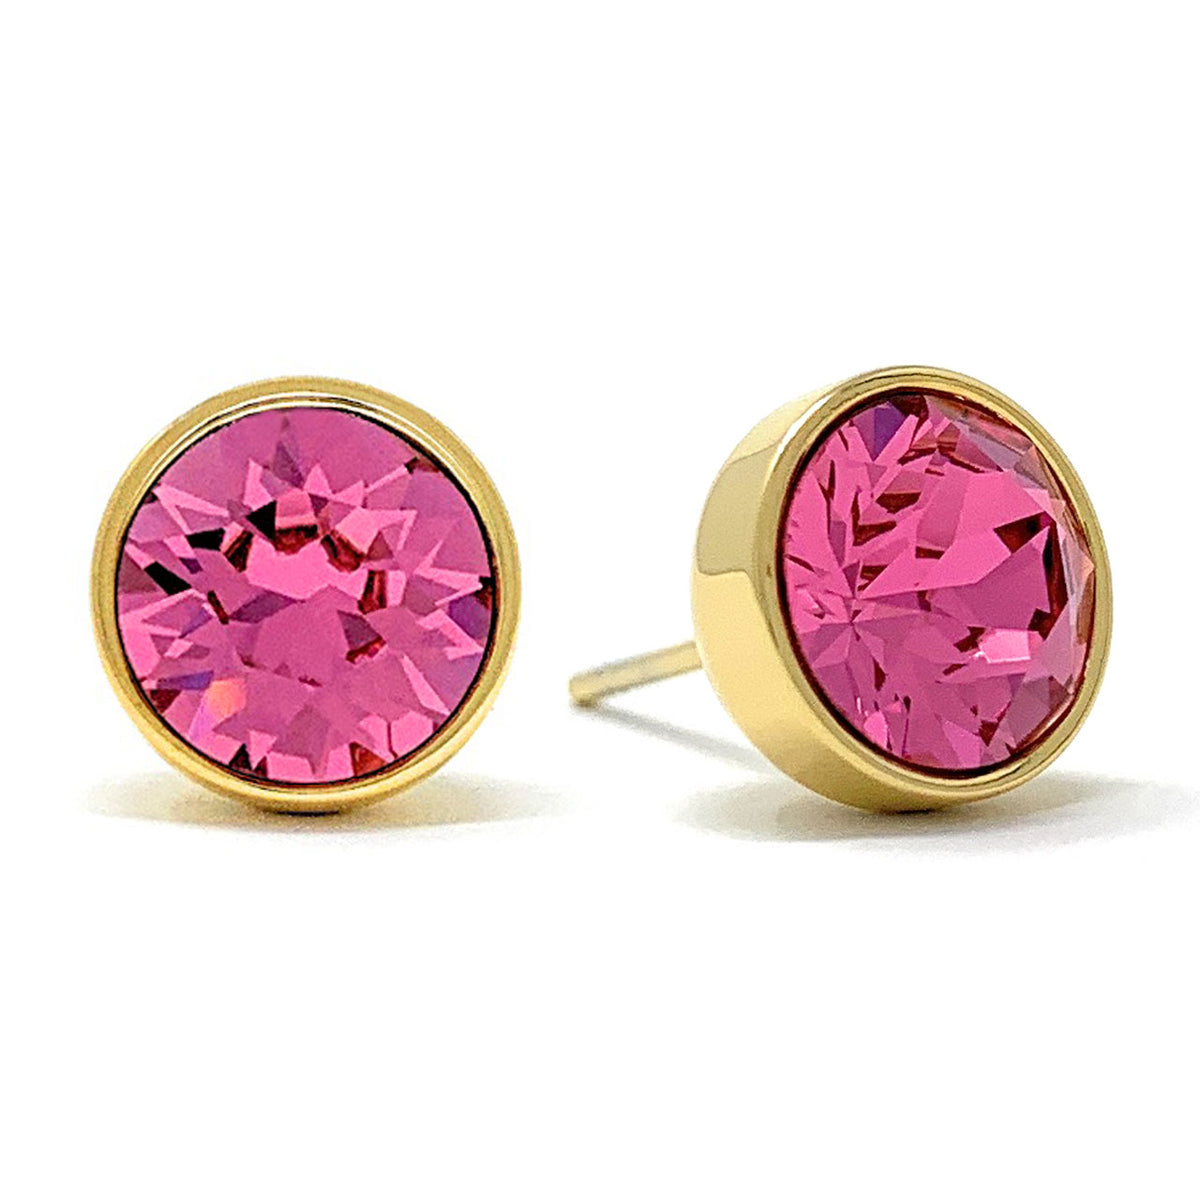 Harley Stud Earrings with Pink Rose Round Crystals from Swarovski Gold Plated - Ed Heart